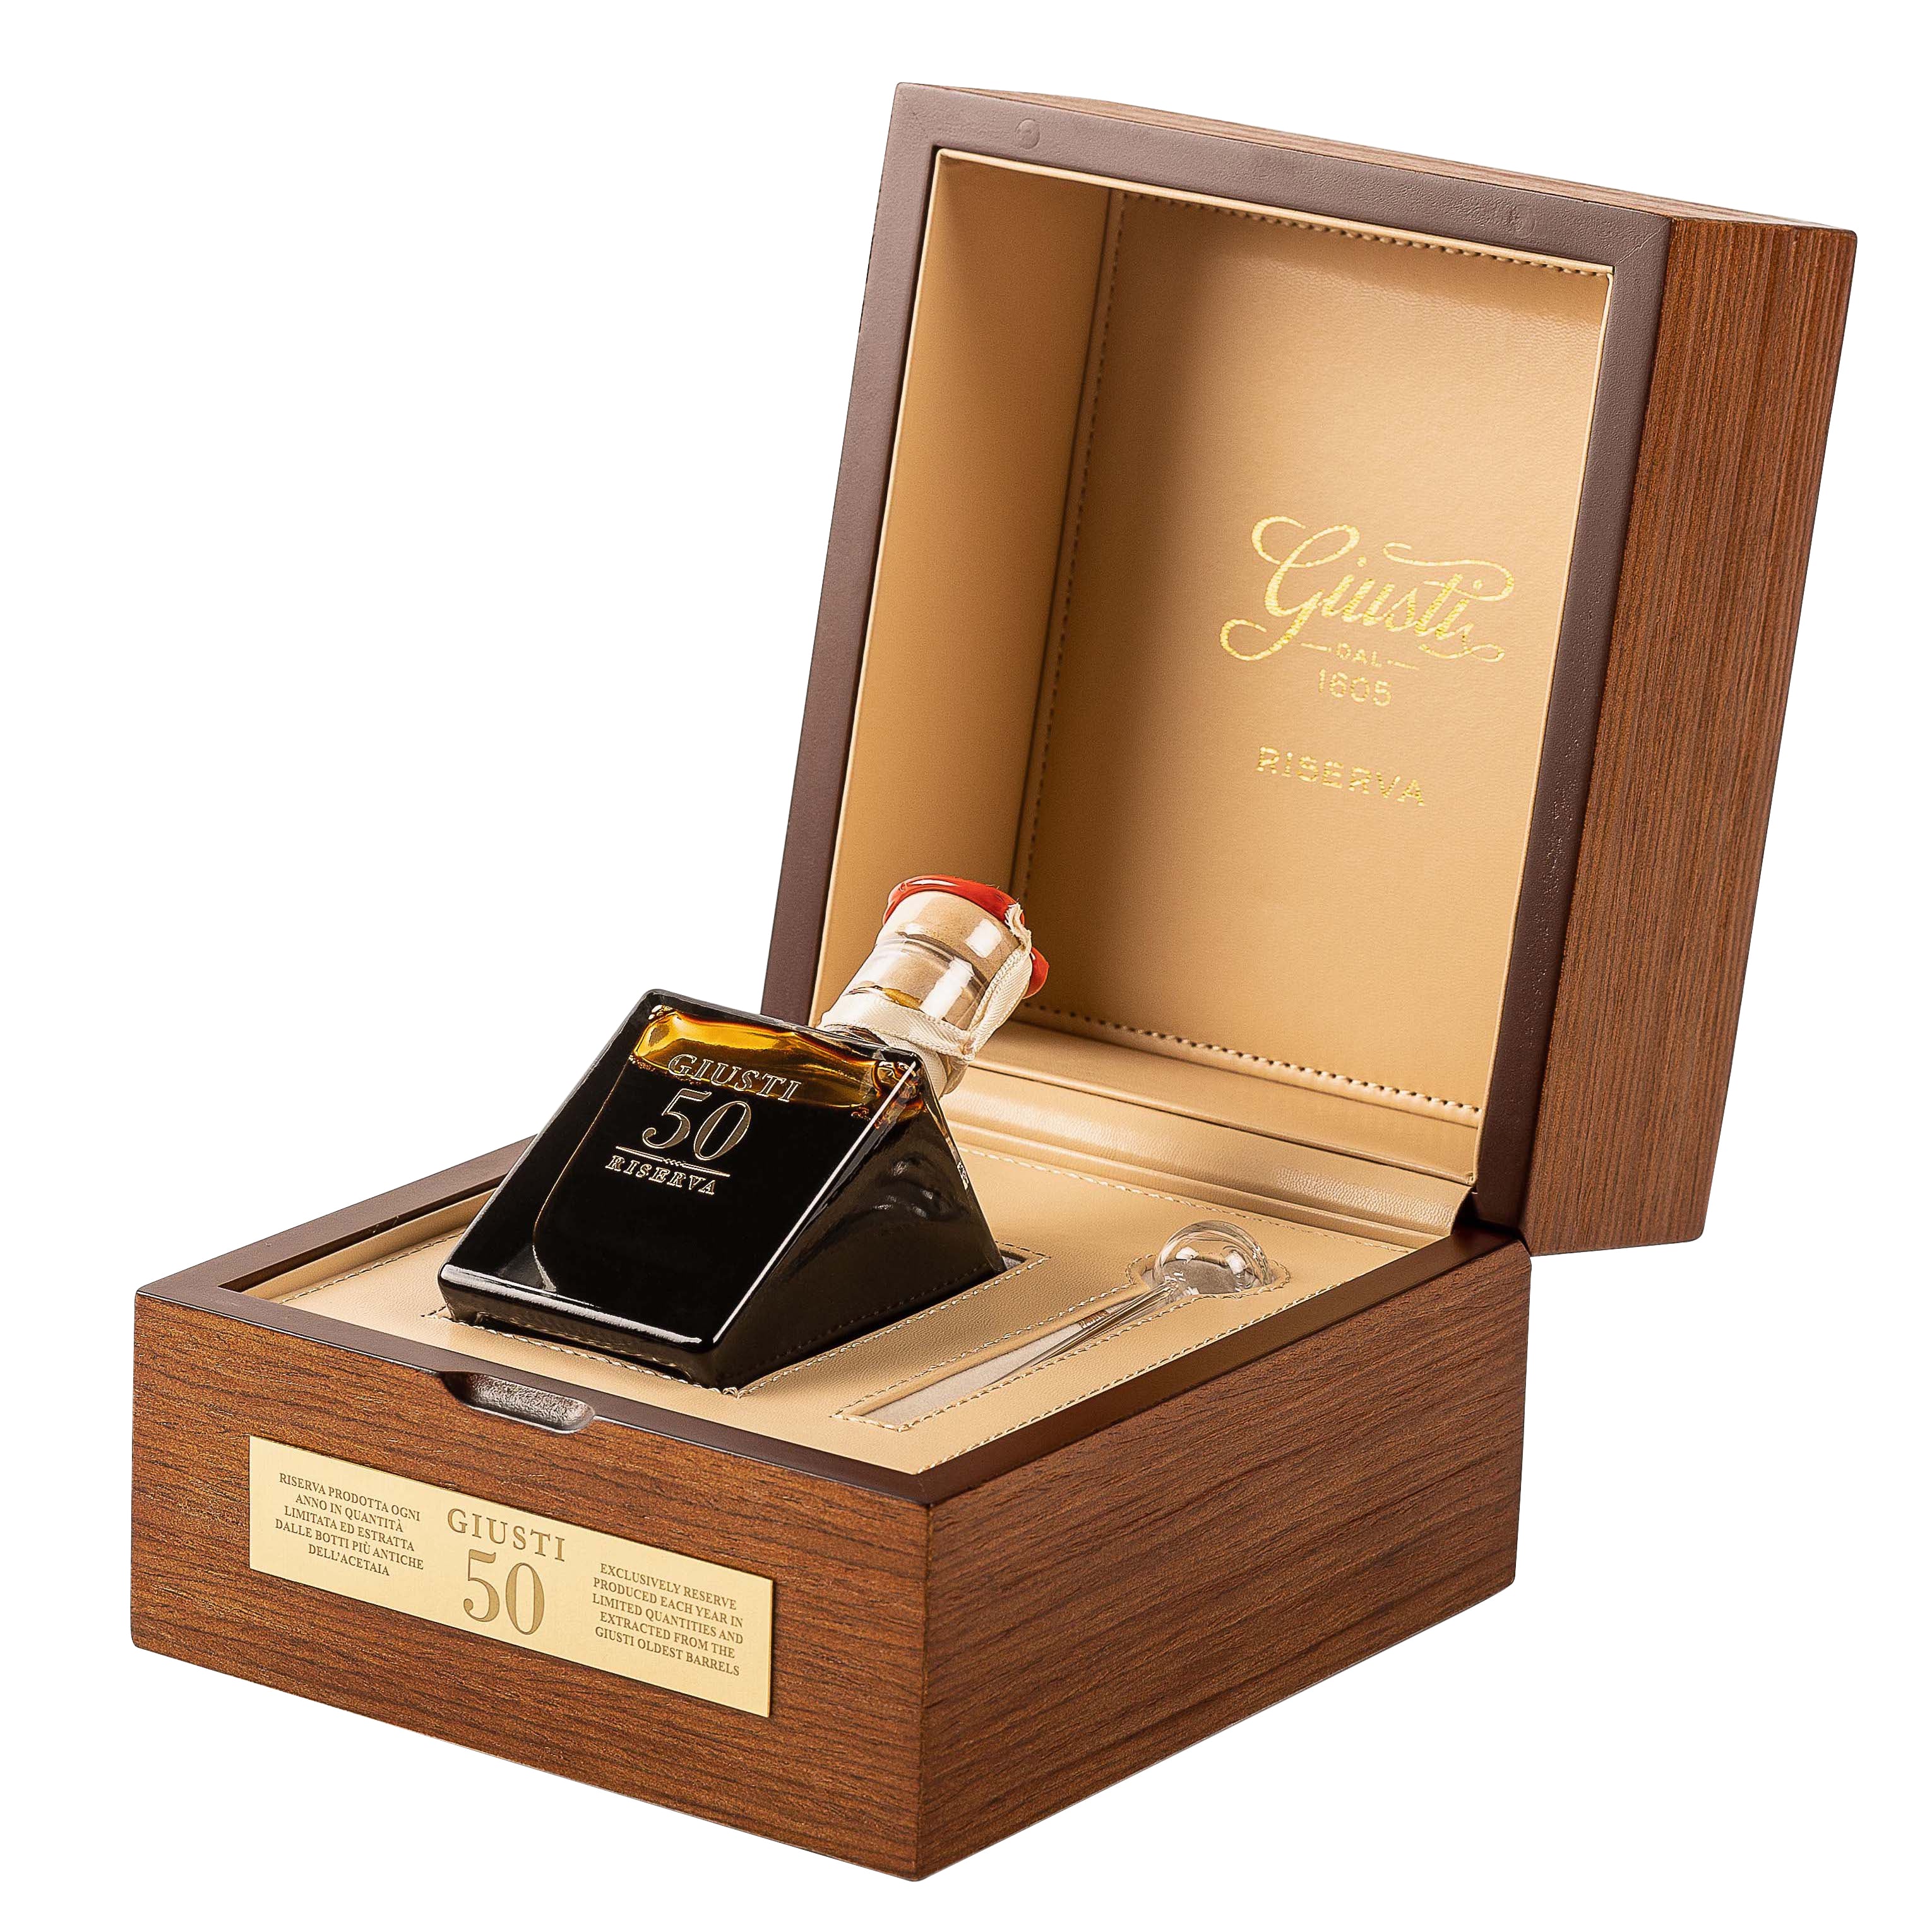 Riserve Traditional 50-Year Balsamic Vinegar and Box by Giusti